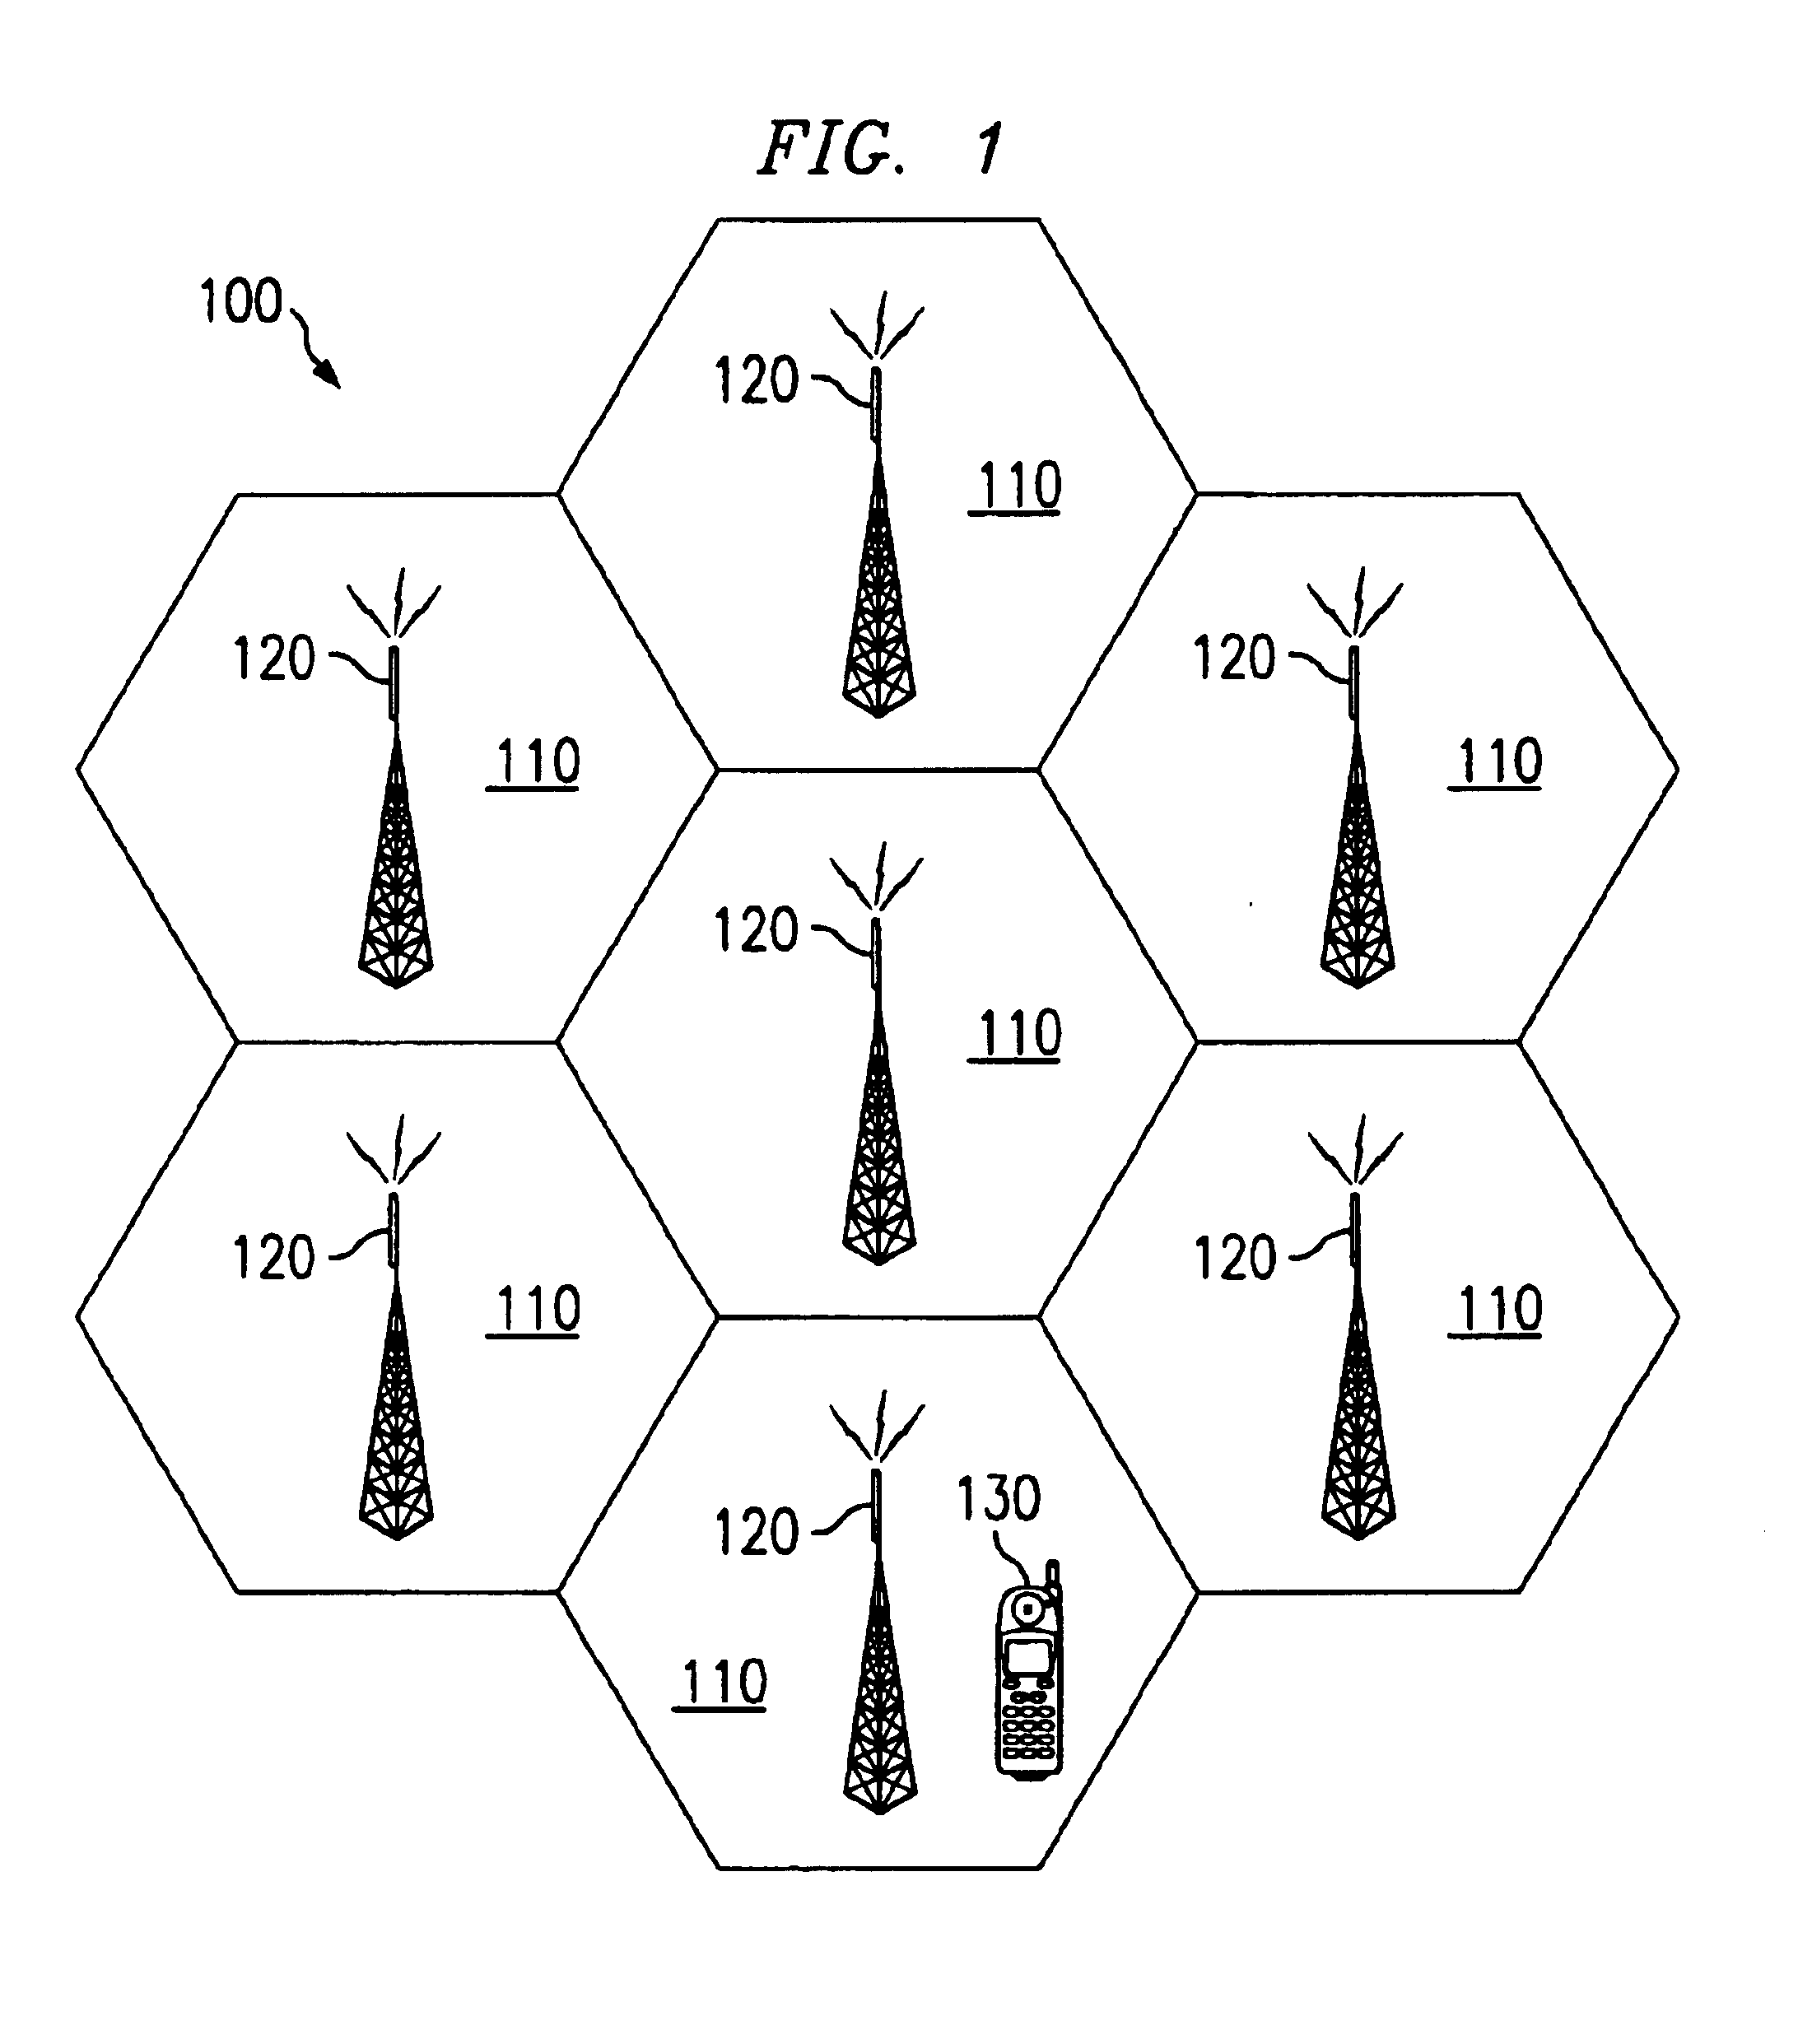 Apparatus and method for managing a mobile phone answering mode and outgoing message based on a location of the mobile phone